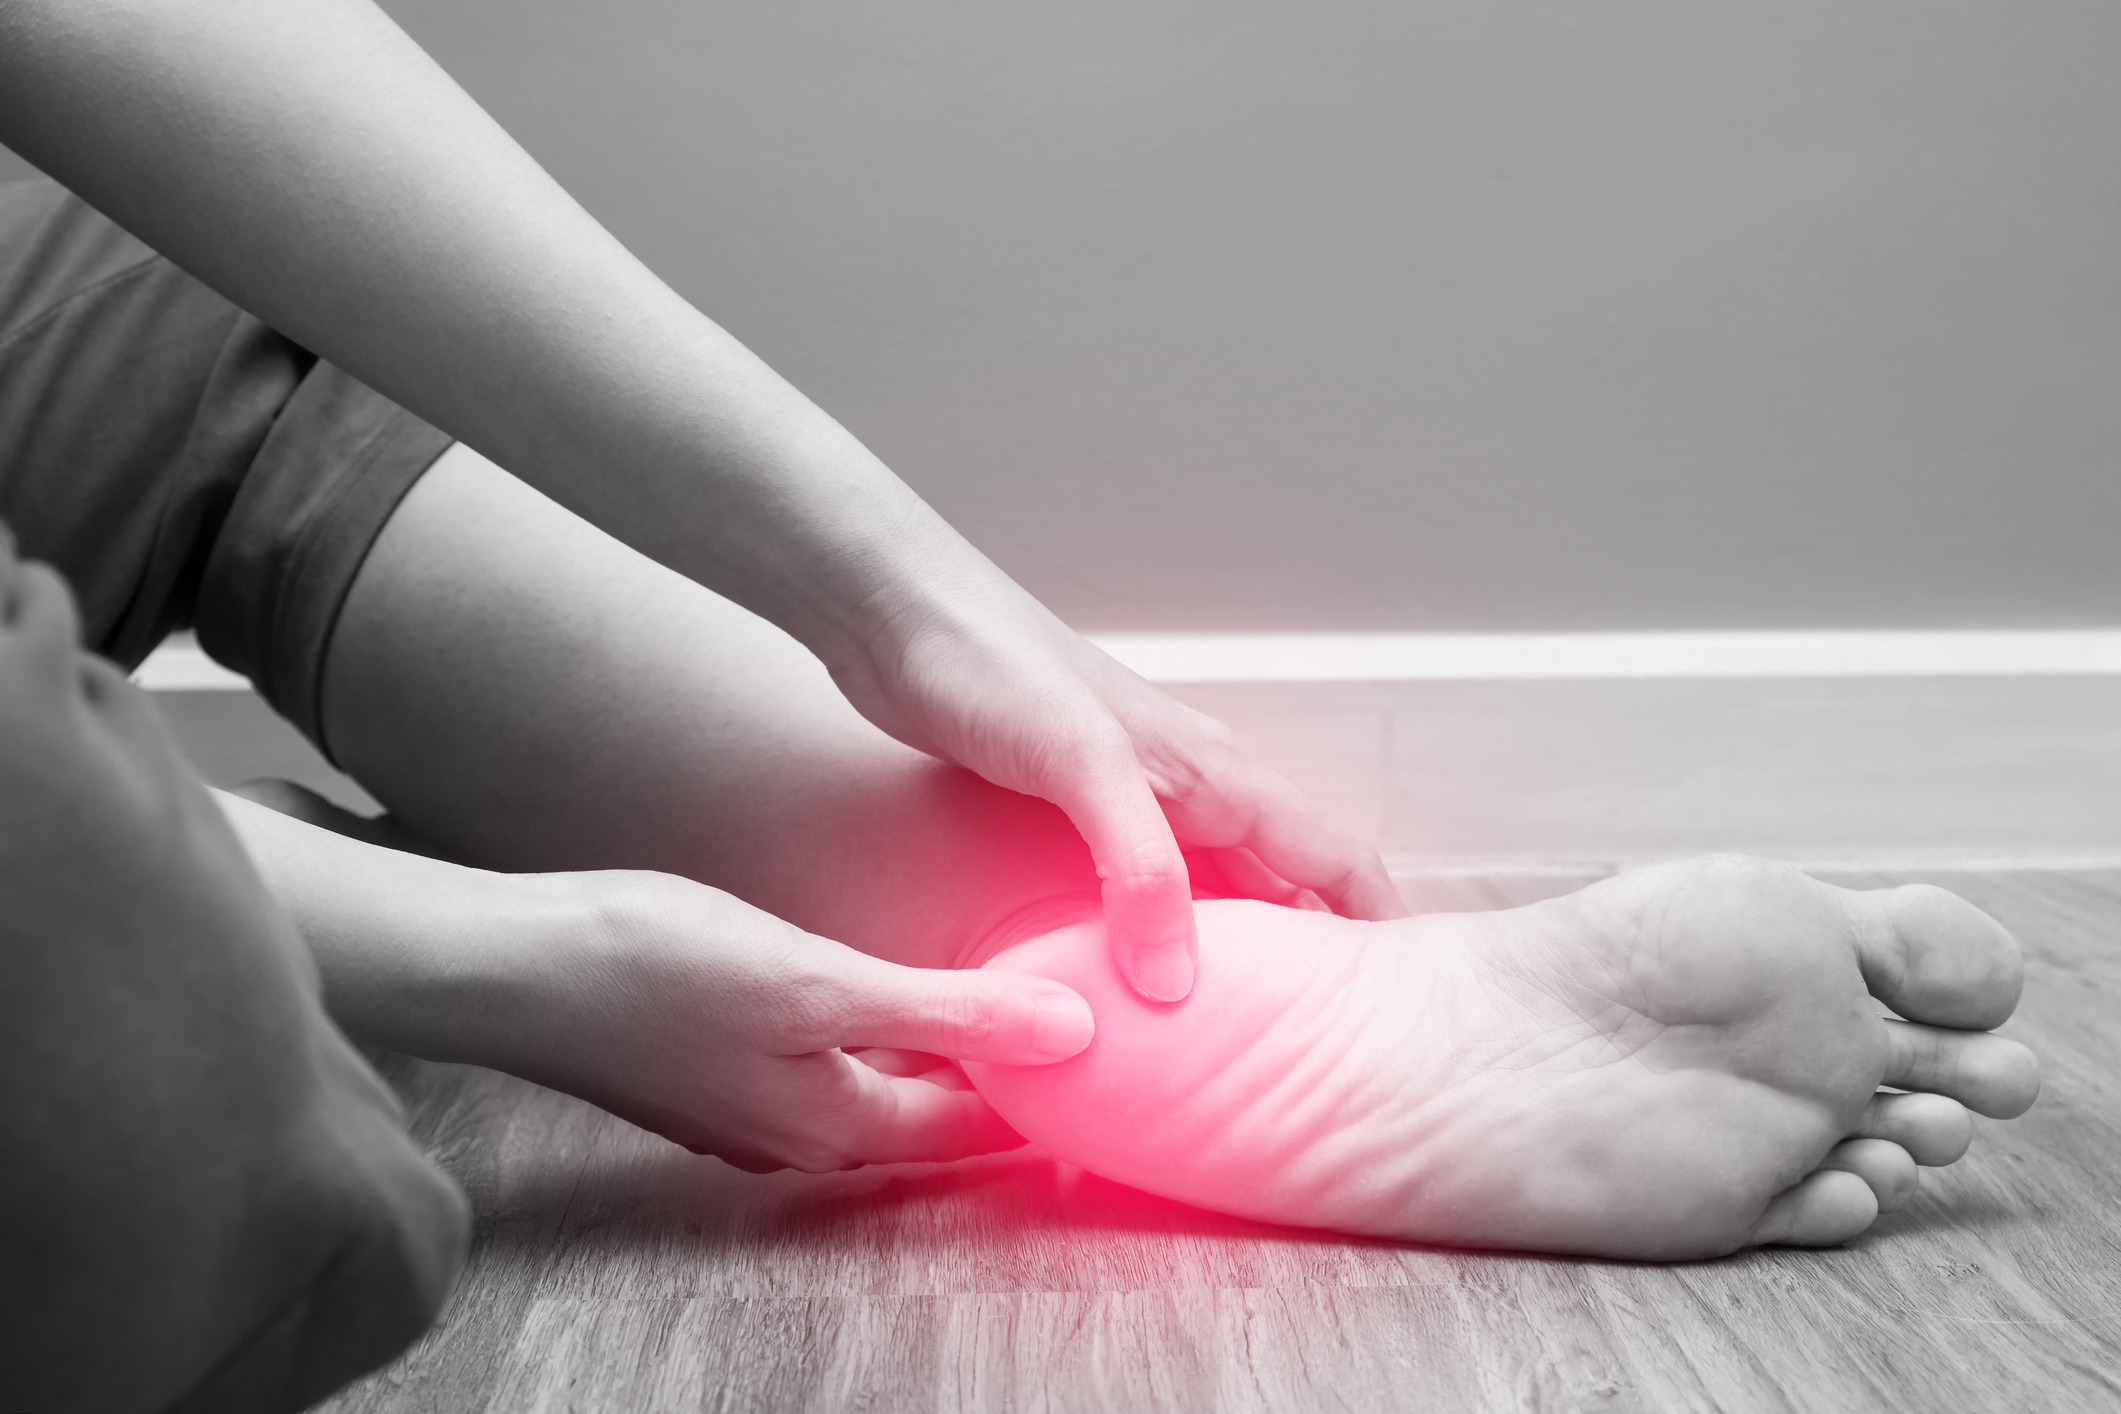 Treatment of Plantar Fasciitis with a Combination of Laser Therapy and KT  Tape